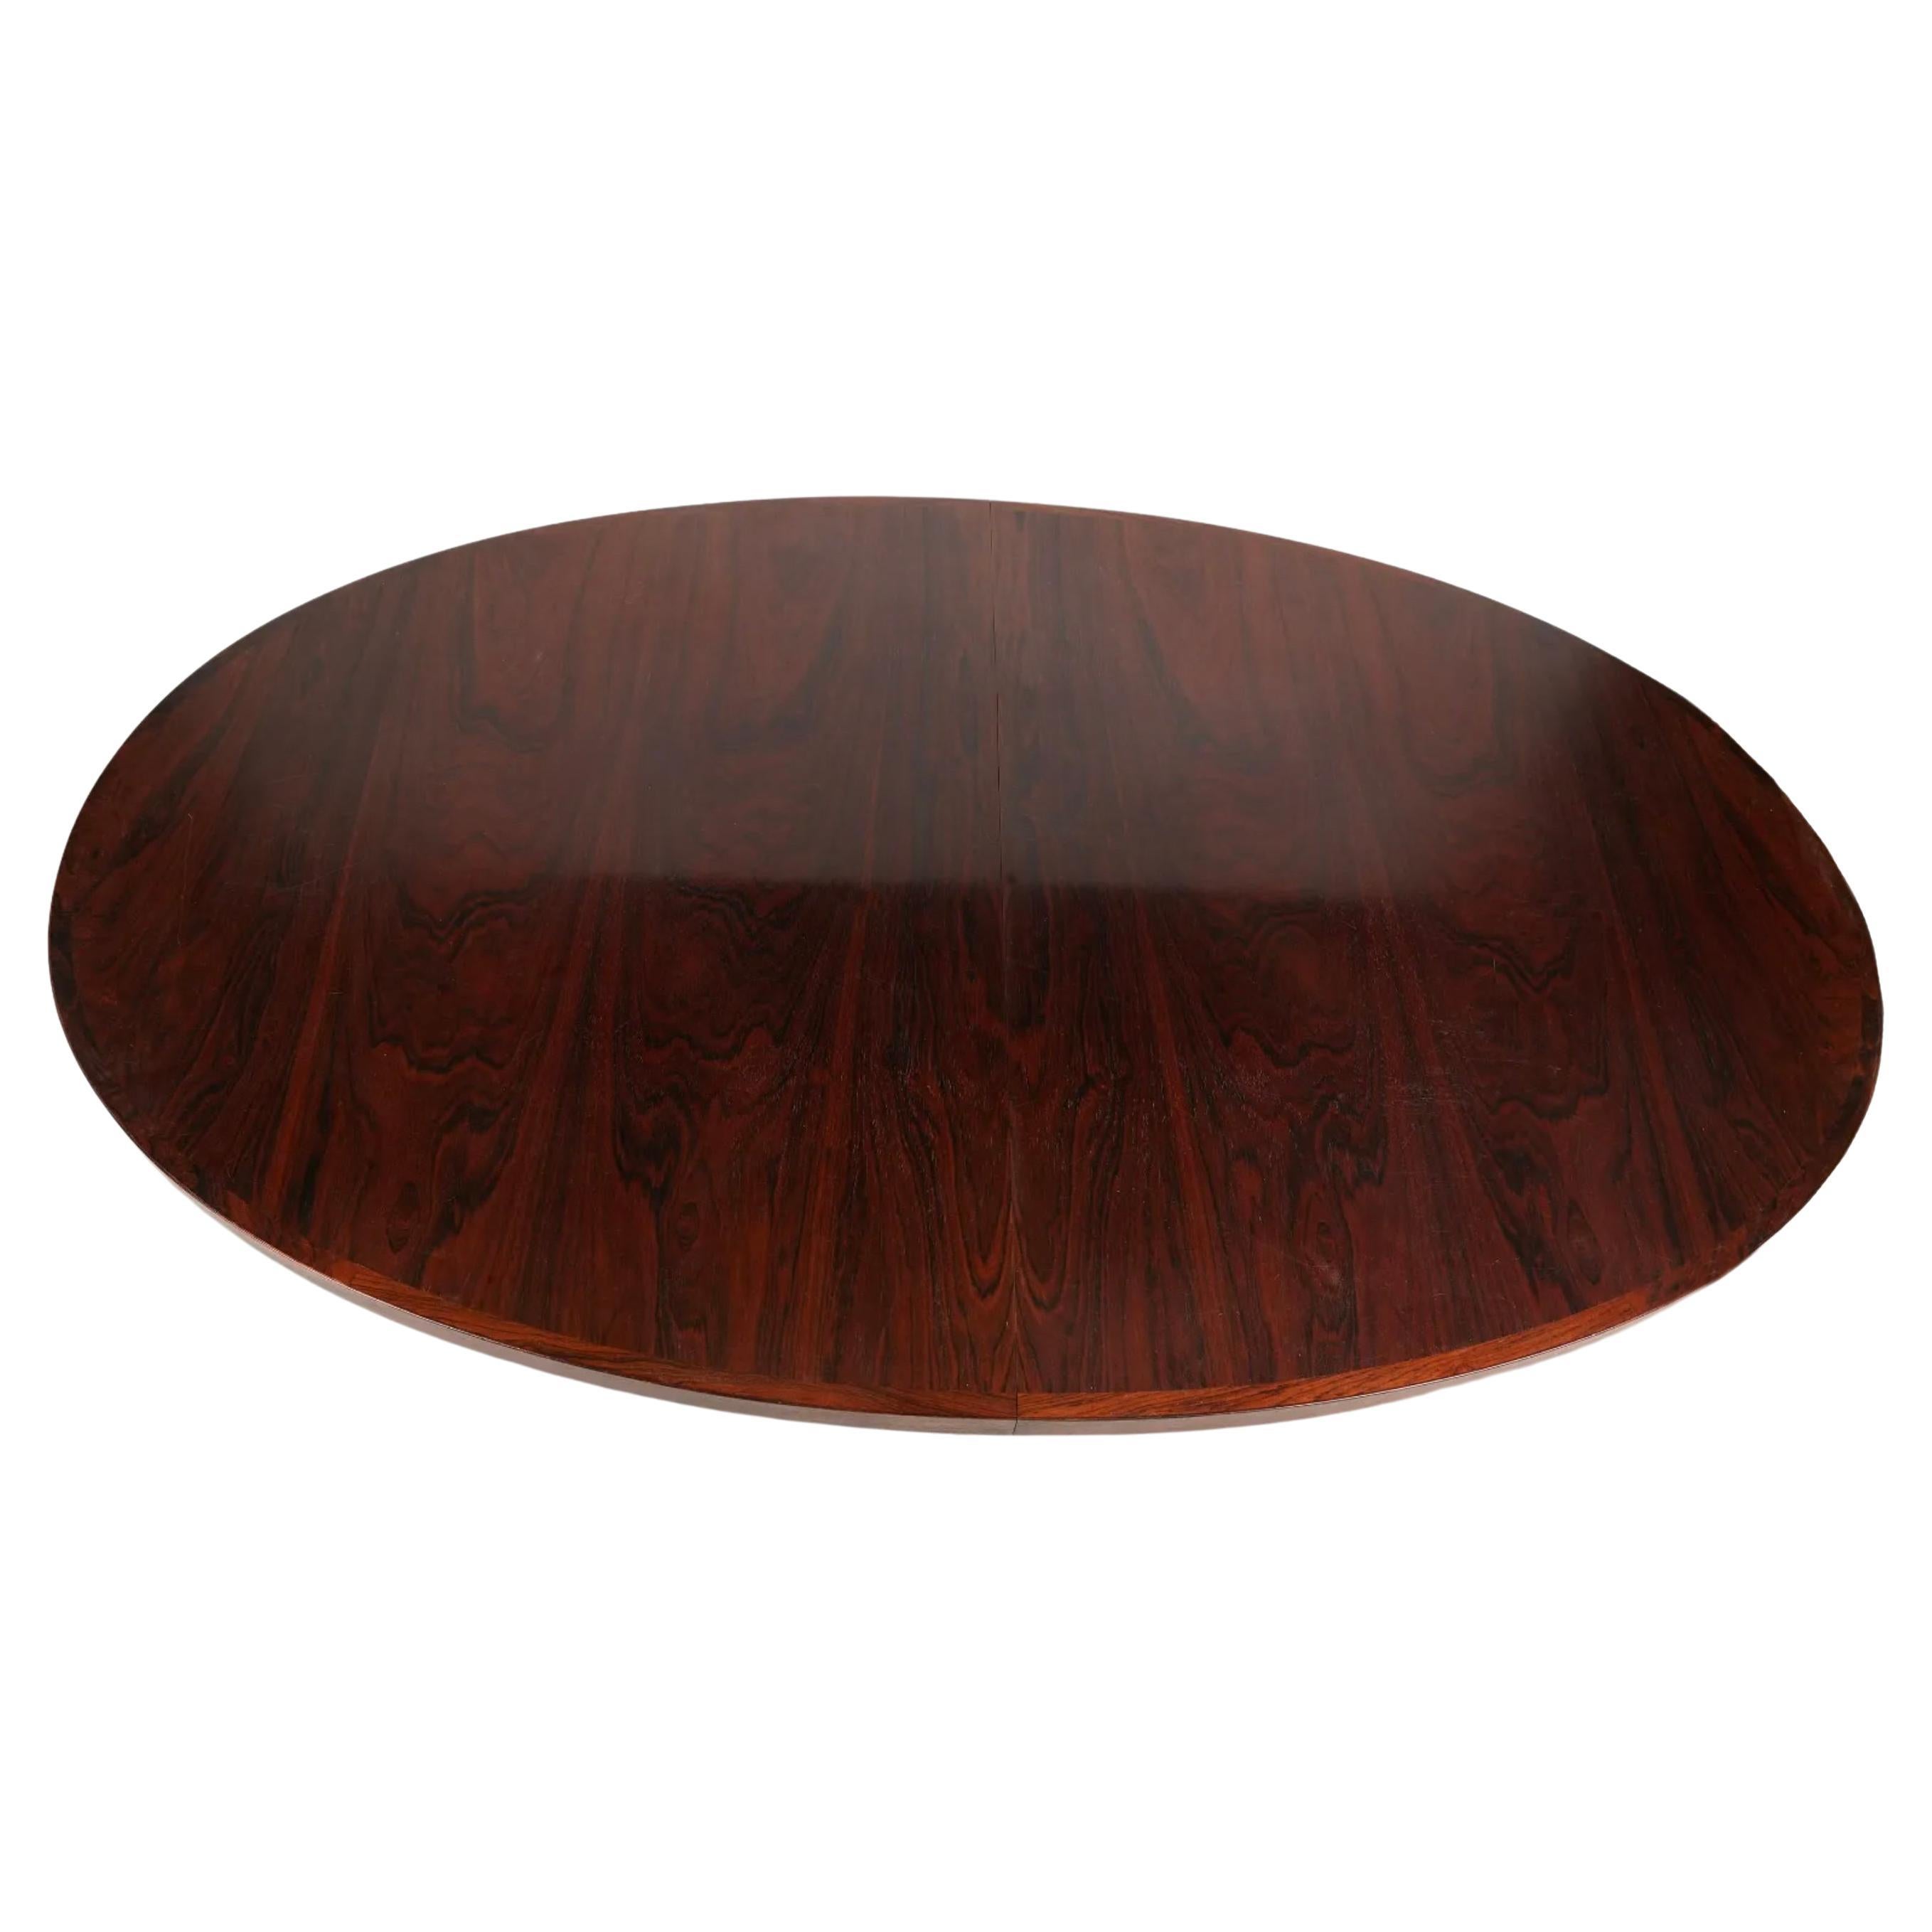 Woodwork Stunning Mid Century Oval Rosewood Danish Modern Extension Dining Table 2 Leaves